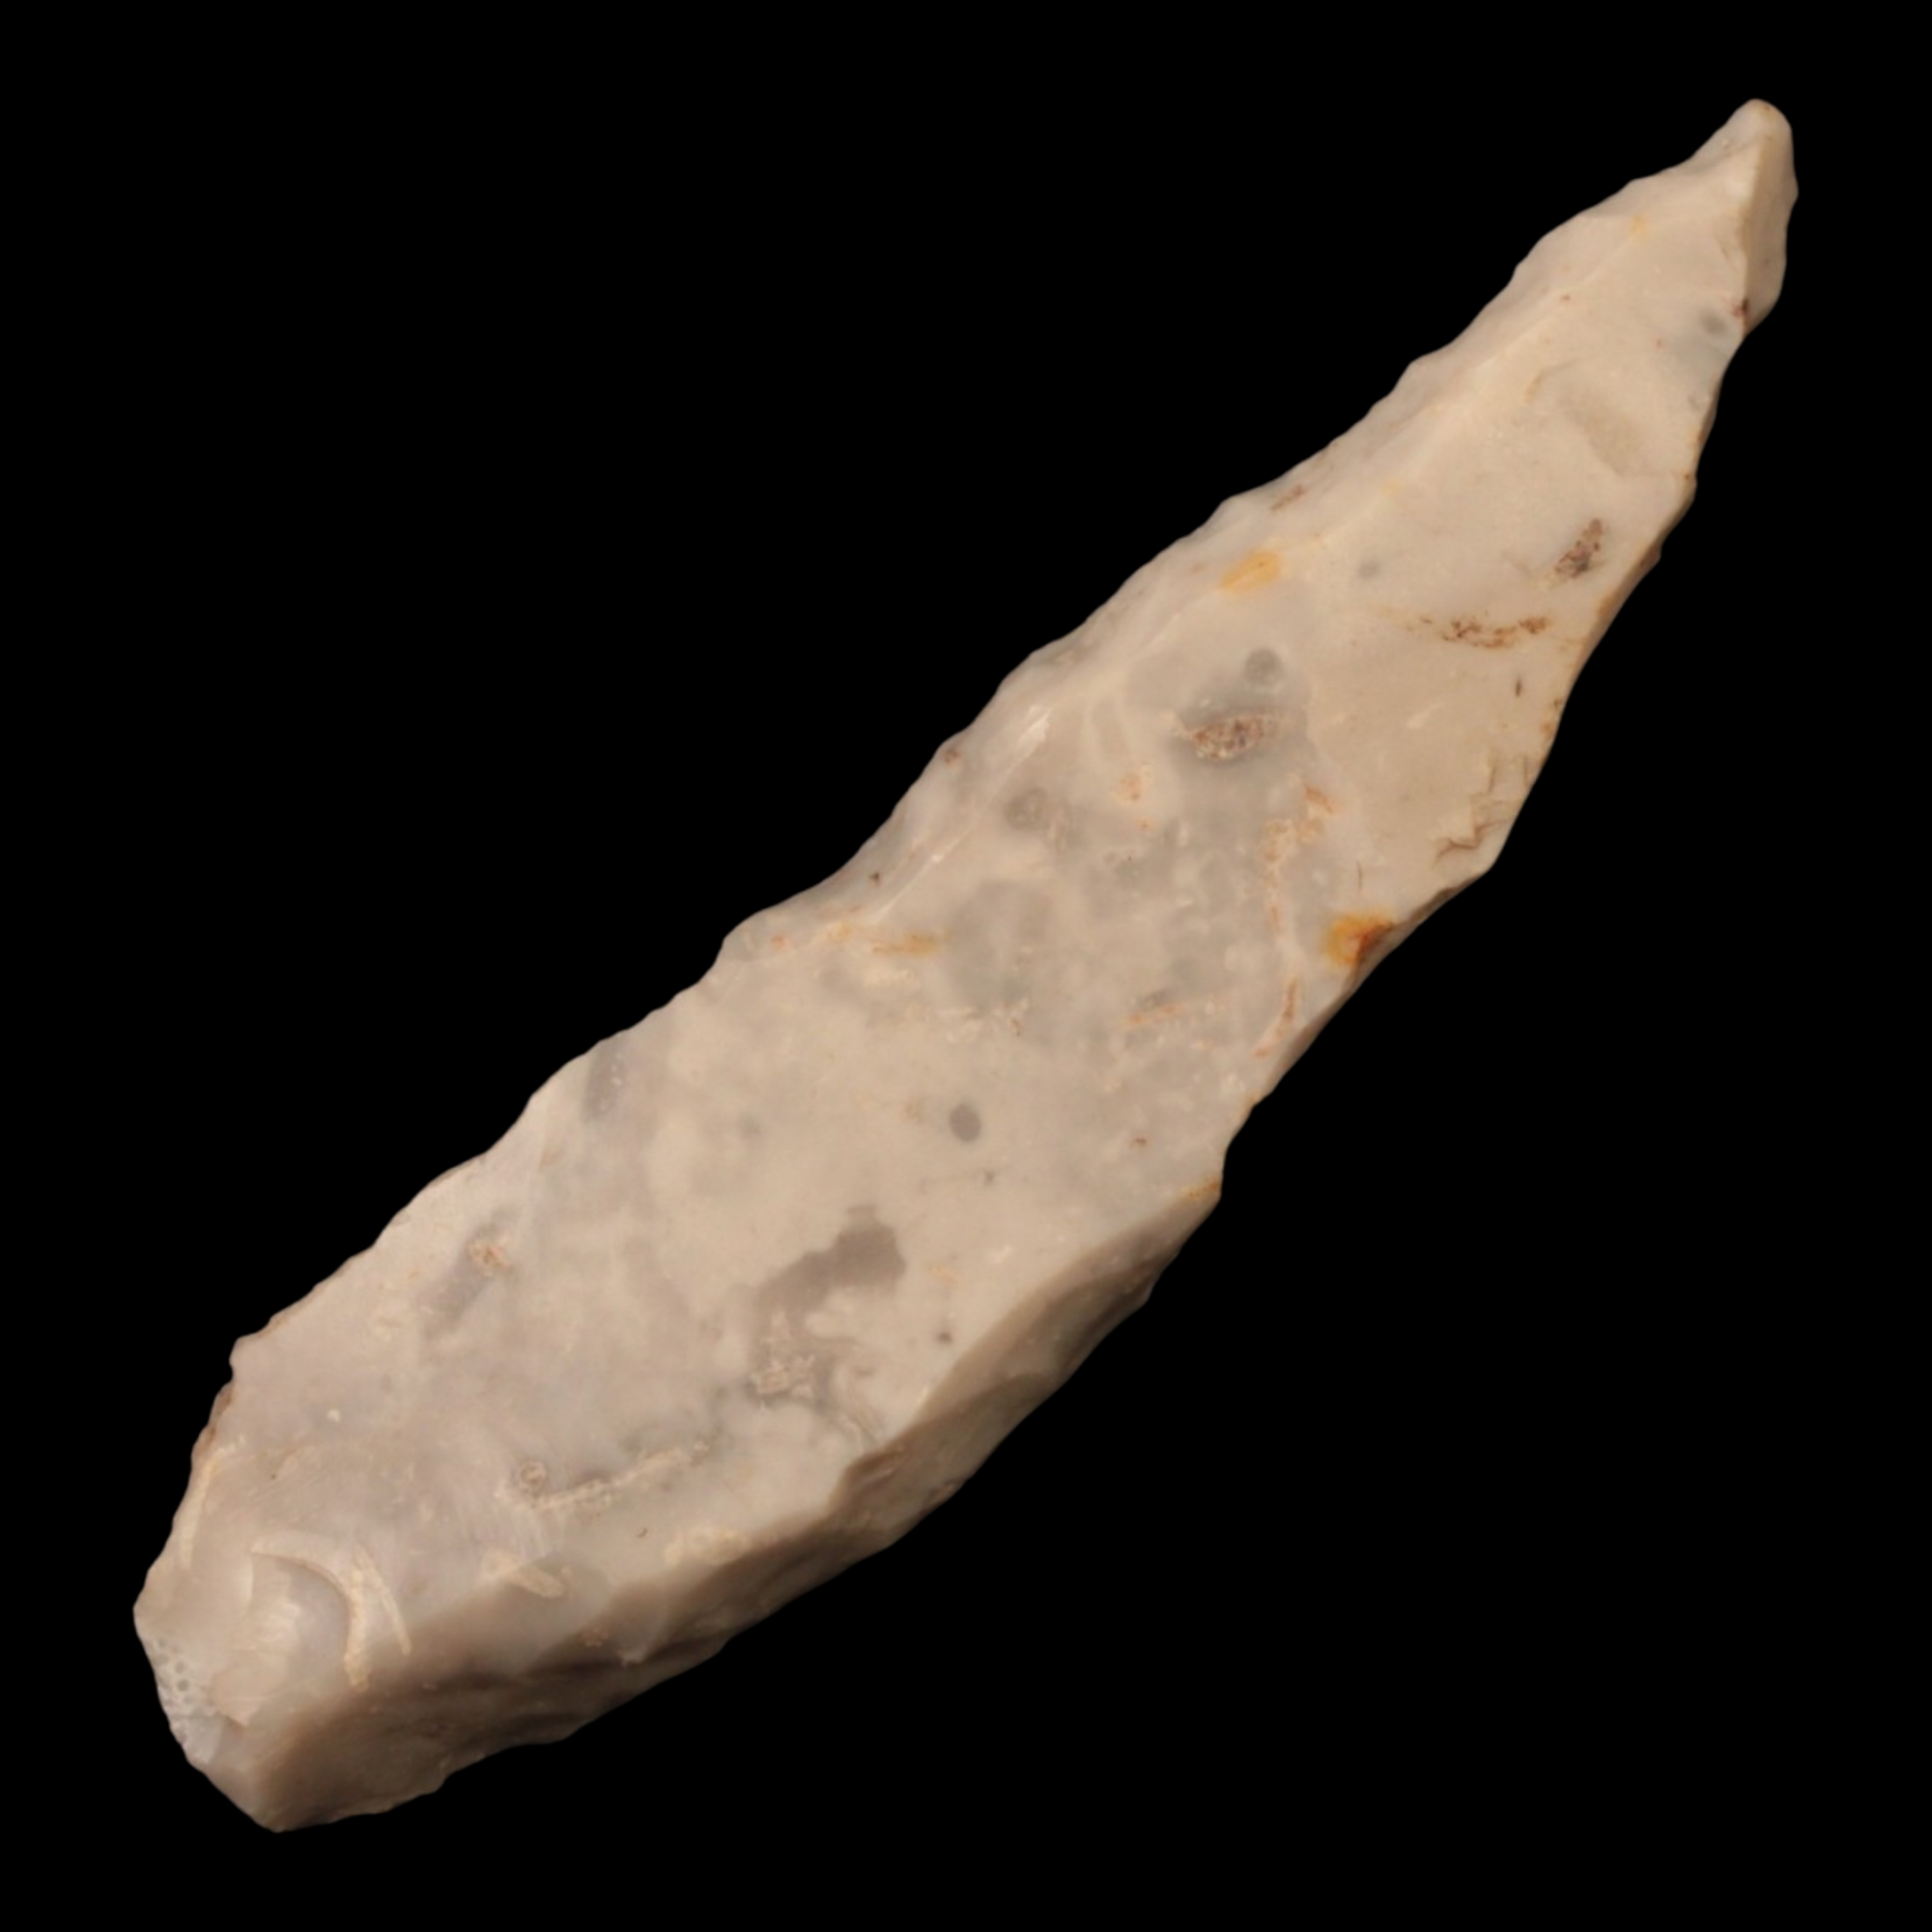 Danish Mesolithic Stone Tool, 2.9 inches (Burin, Engraver) - c. 9000 to 5000 BCE - Denmark - 1/17/23 Auction